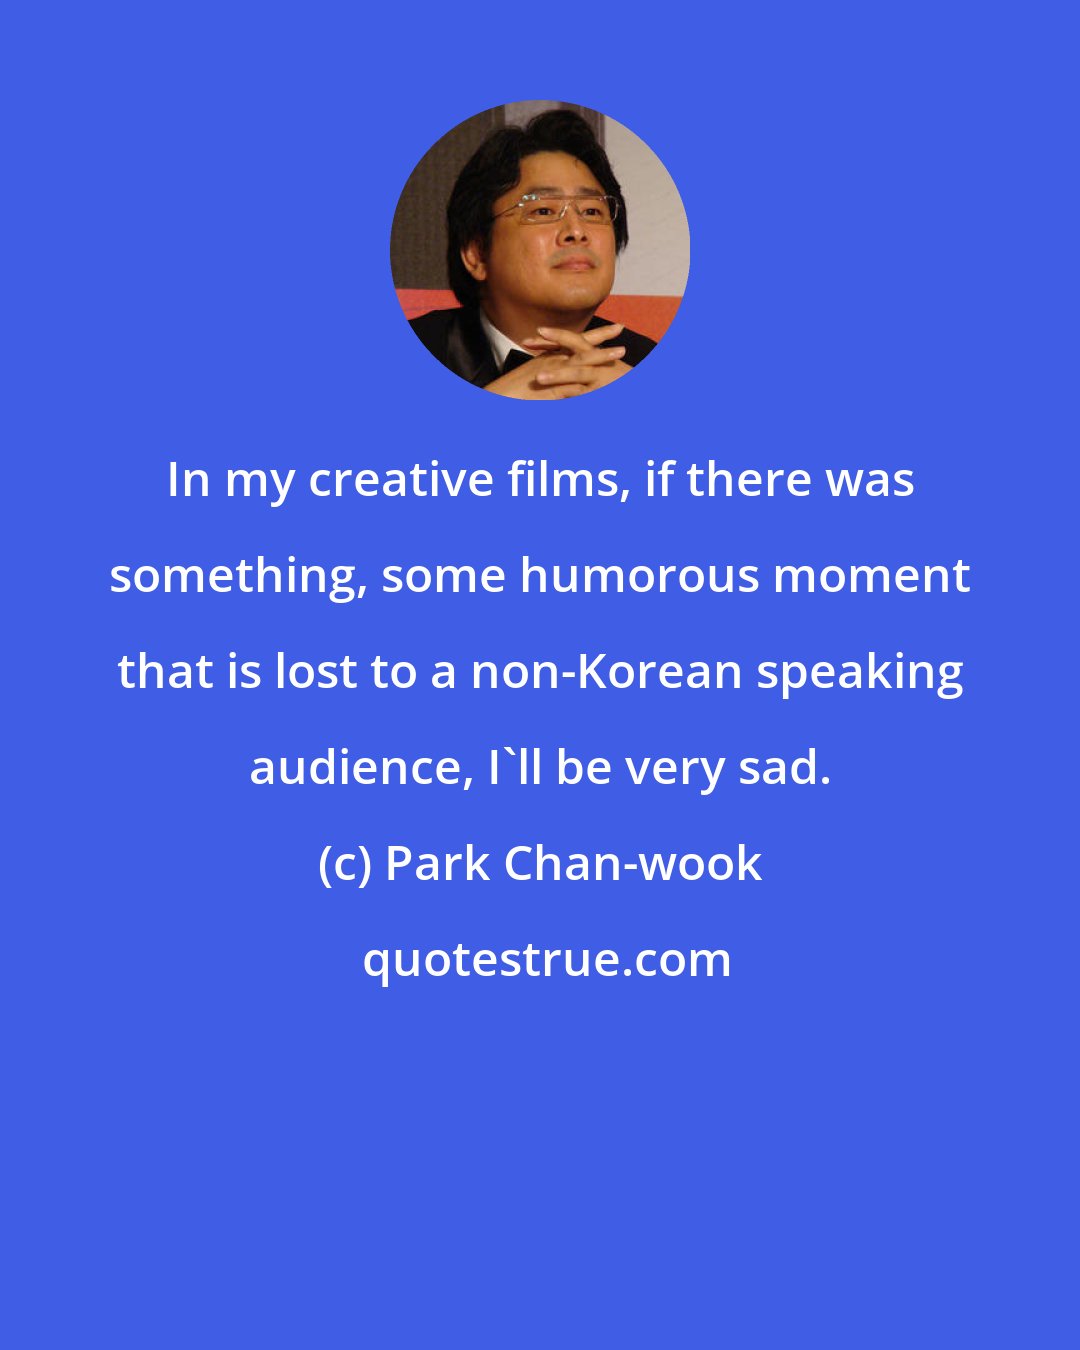 Park Chan-wook: In my creative films, if there was something, some humorous moment that is lost to a non-Korean speaking audience, I'll be very sad.